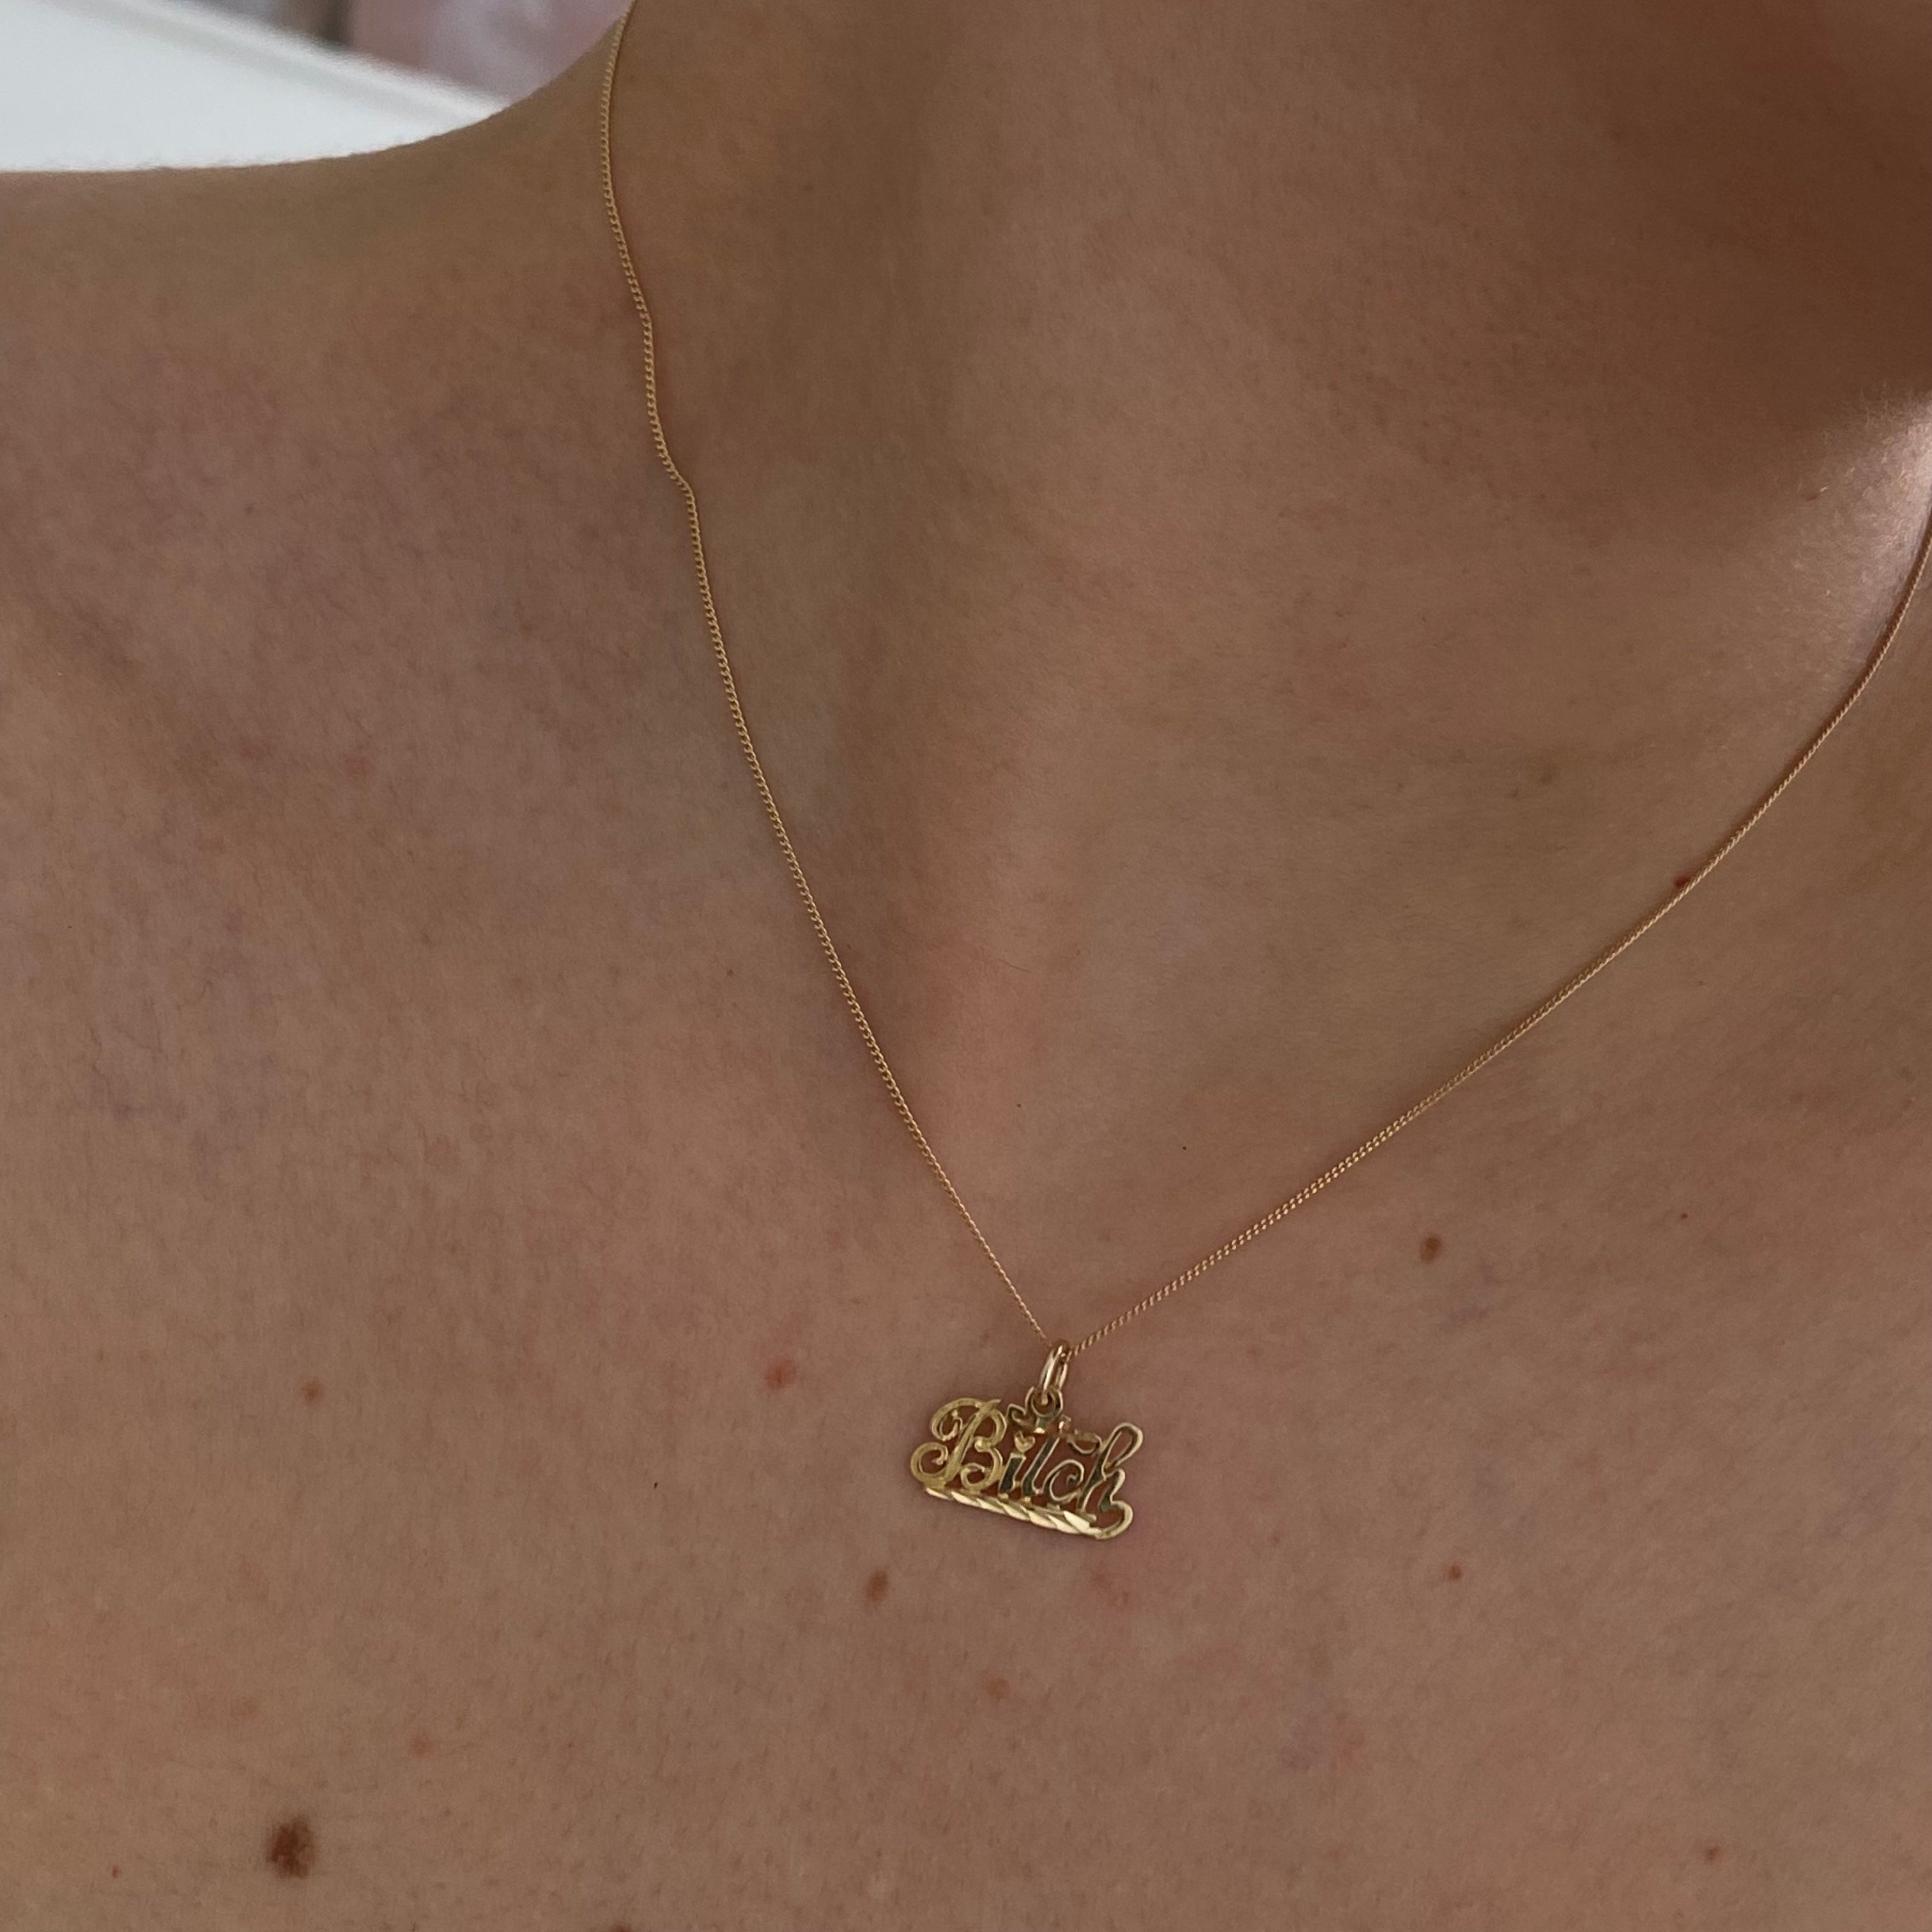 10K gold "Bitch" pendant on a thin curb chain